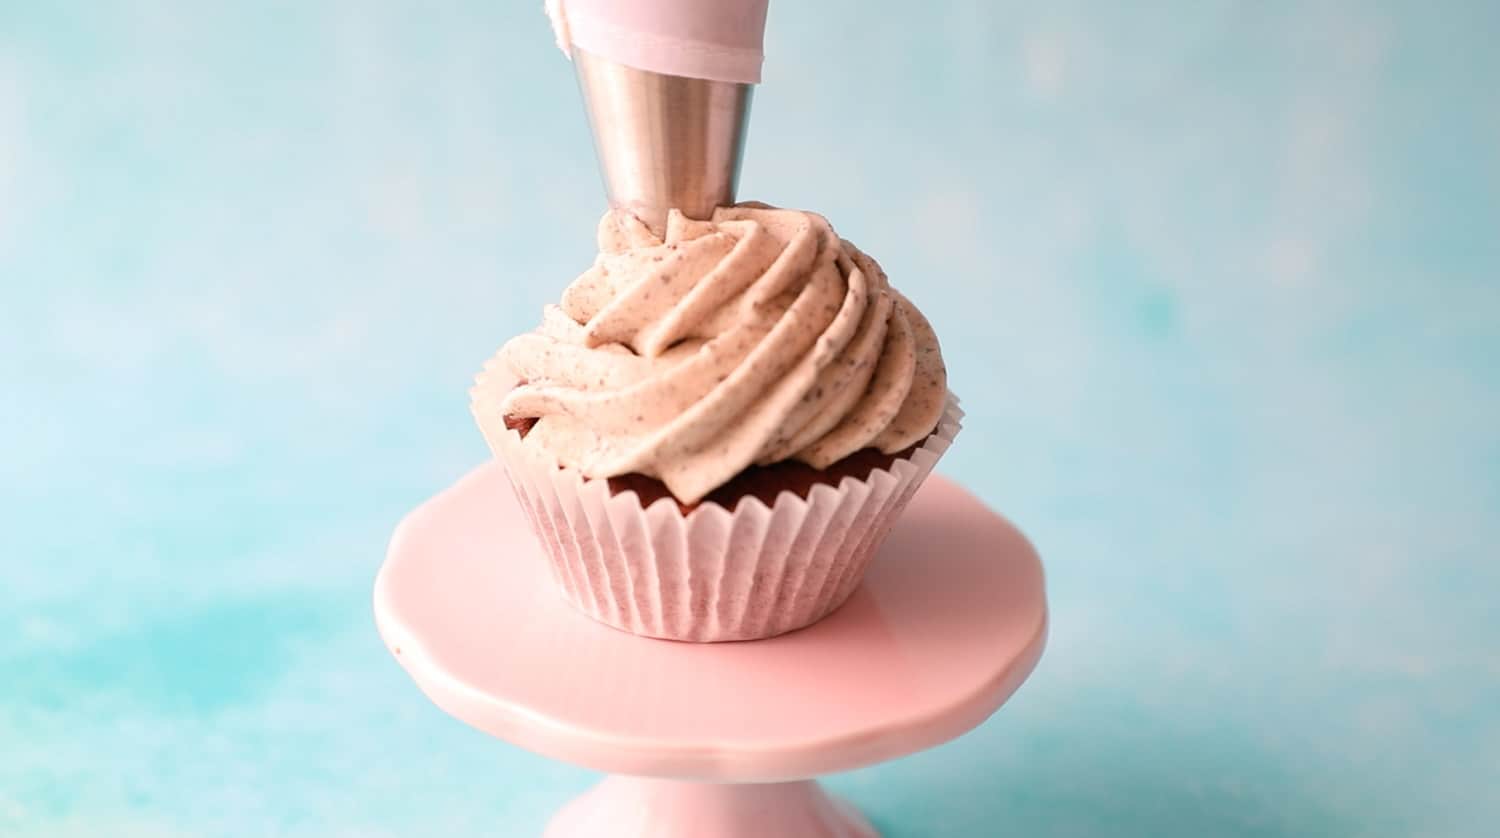 A cupcake on a pink stand with a buttercream swirl also visible is the top of a piping bag fitted with a star tip